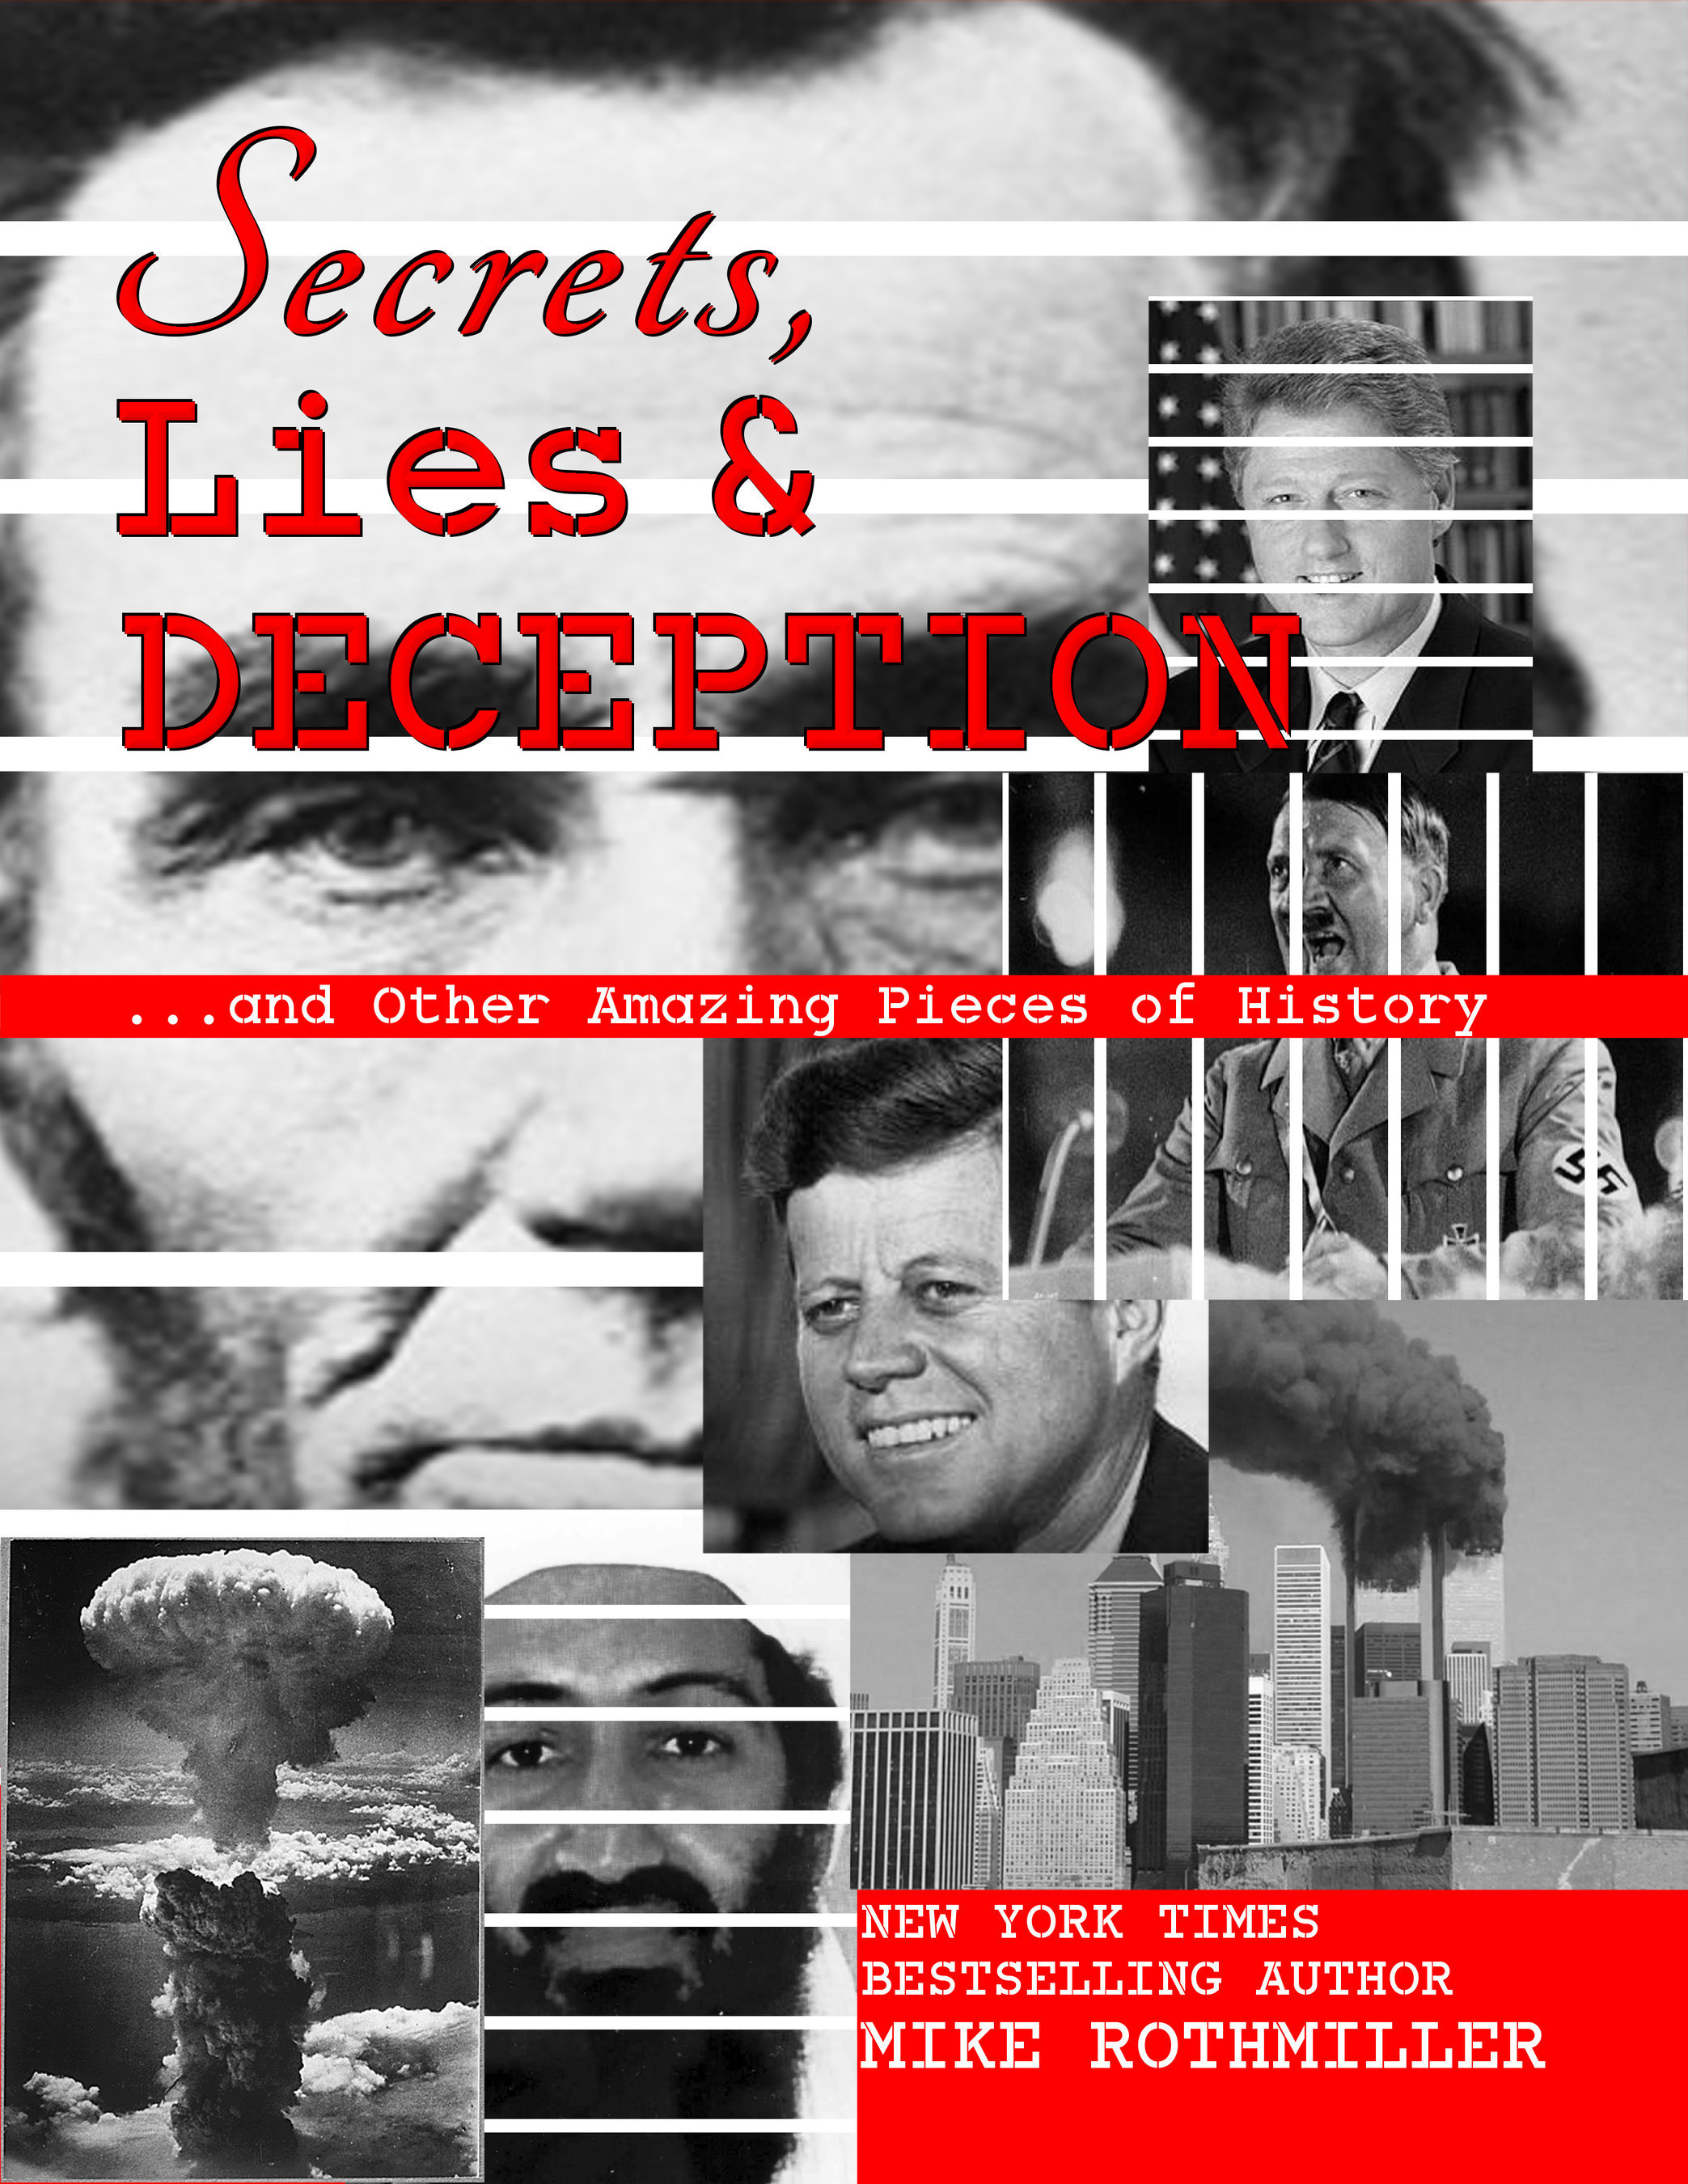 Secret, Lies and Deception and Other Amazing Pieces of History book cover